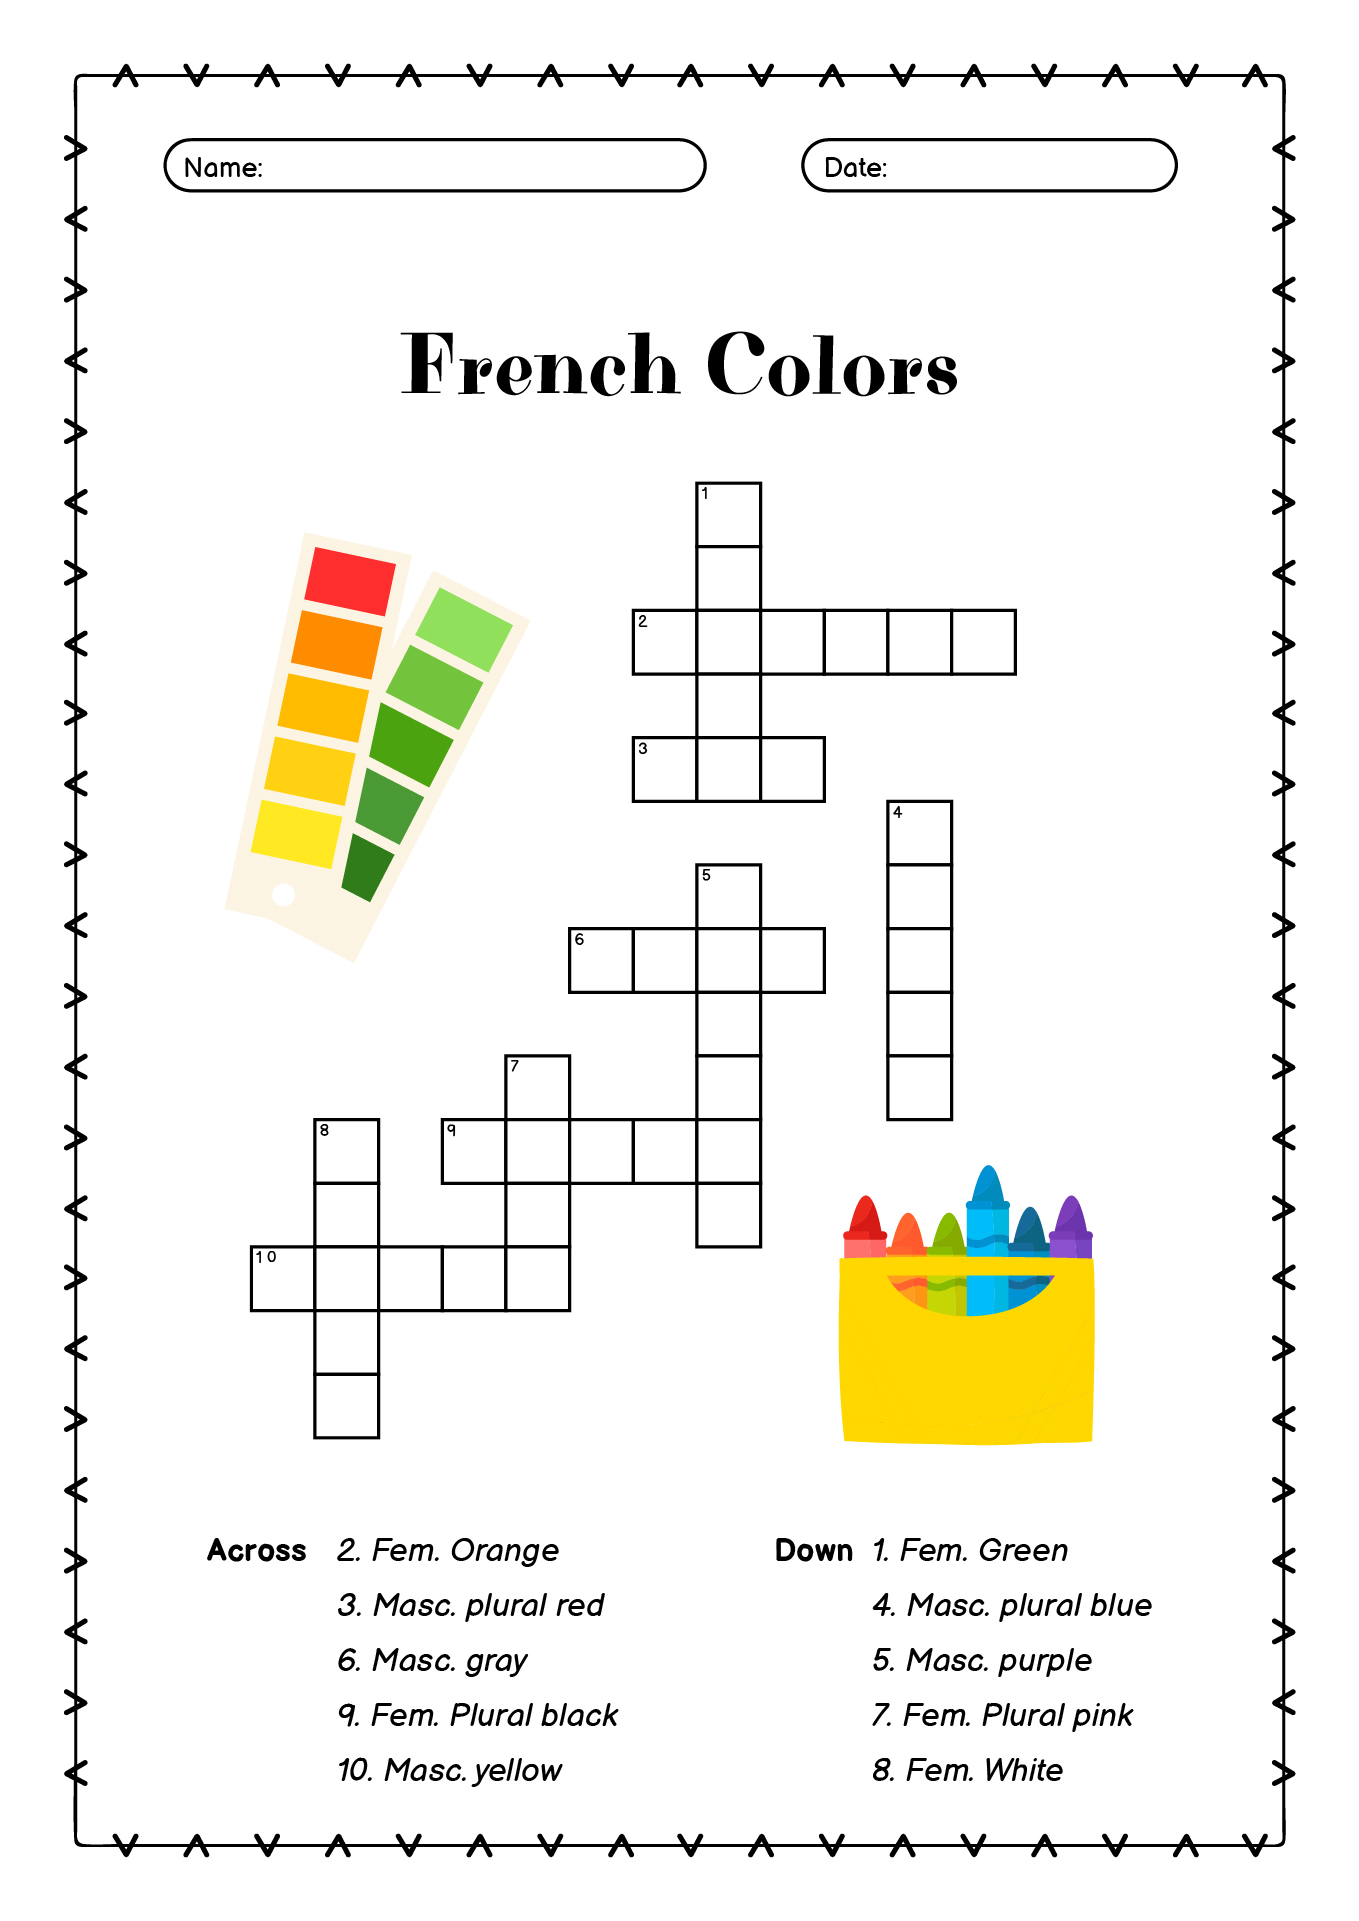 French Colors Crossword Puzzle Worksheet